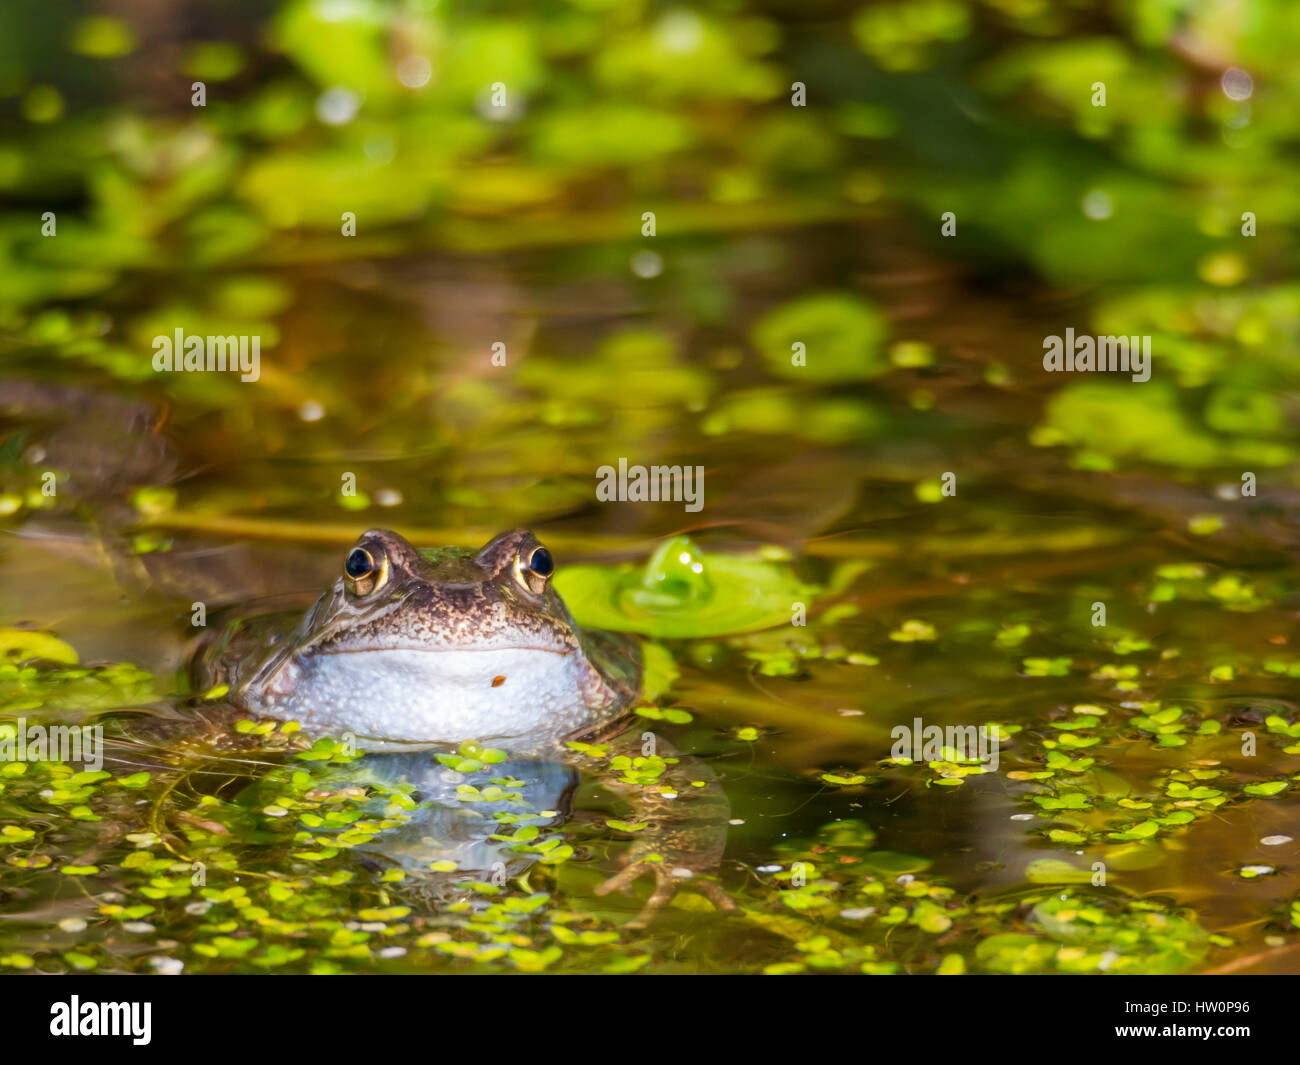 Common Frog - Rana temporaria, in duck weed in a garden pond. Stock Photo